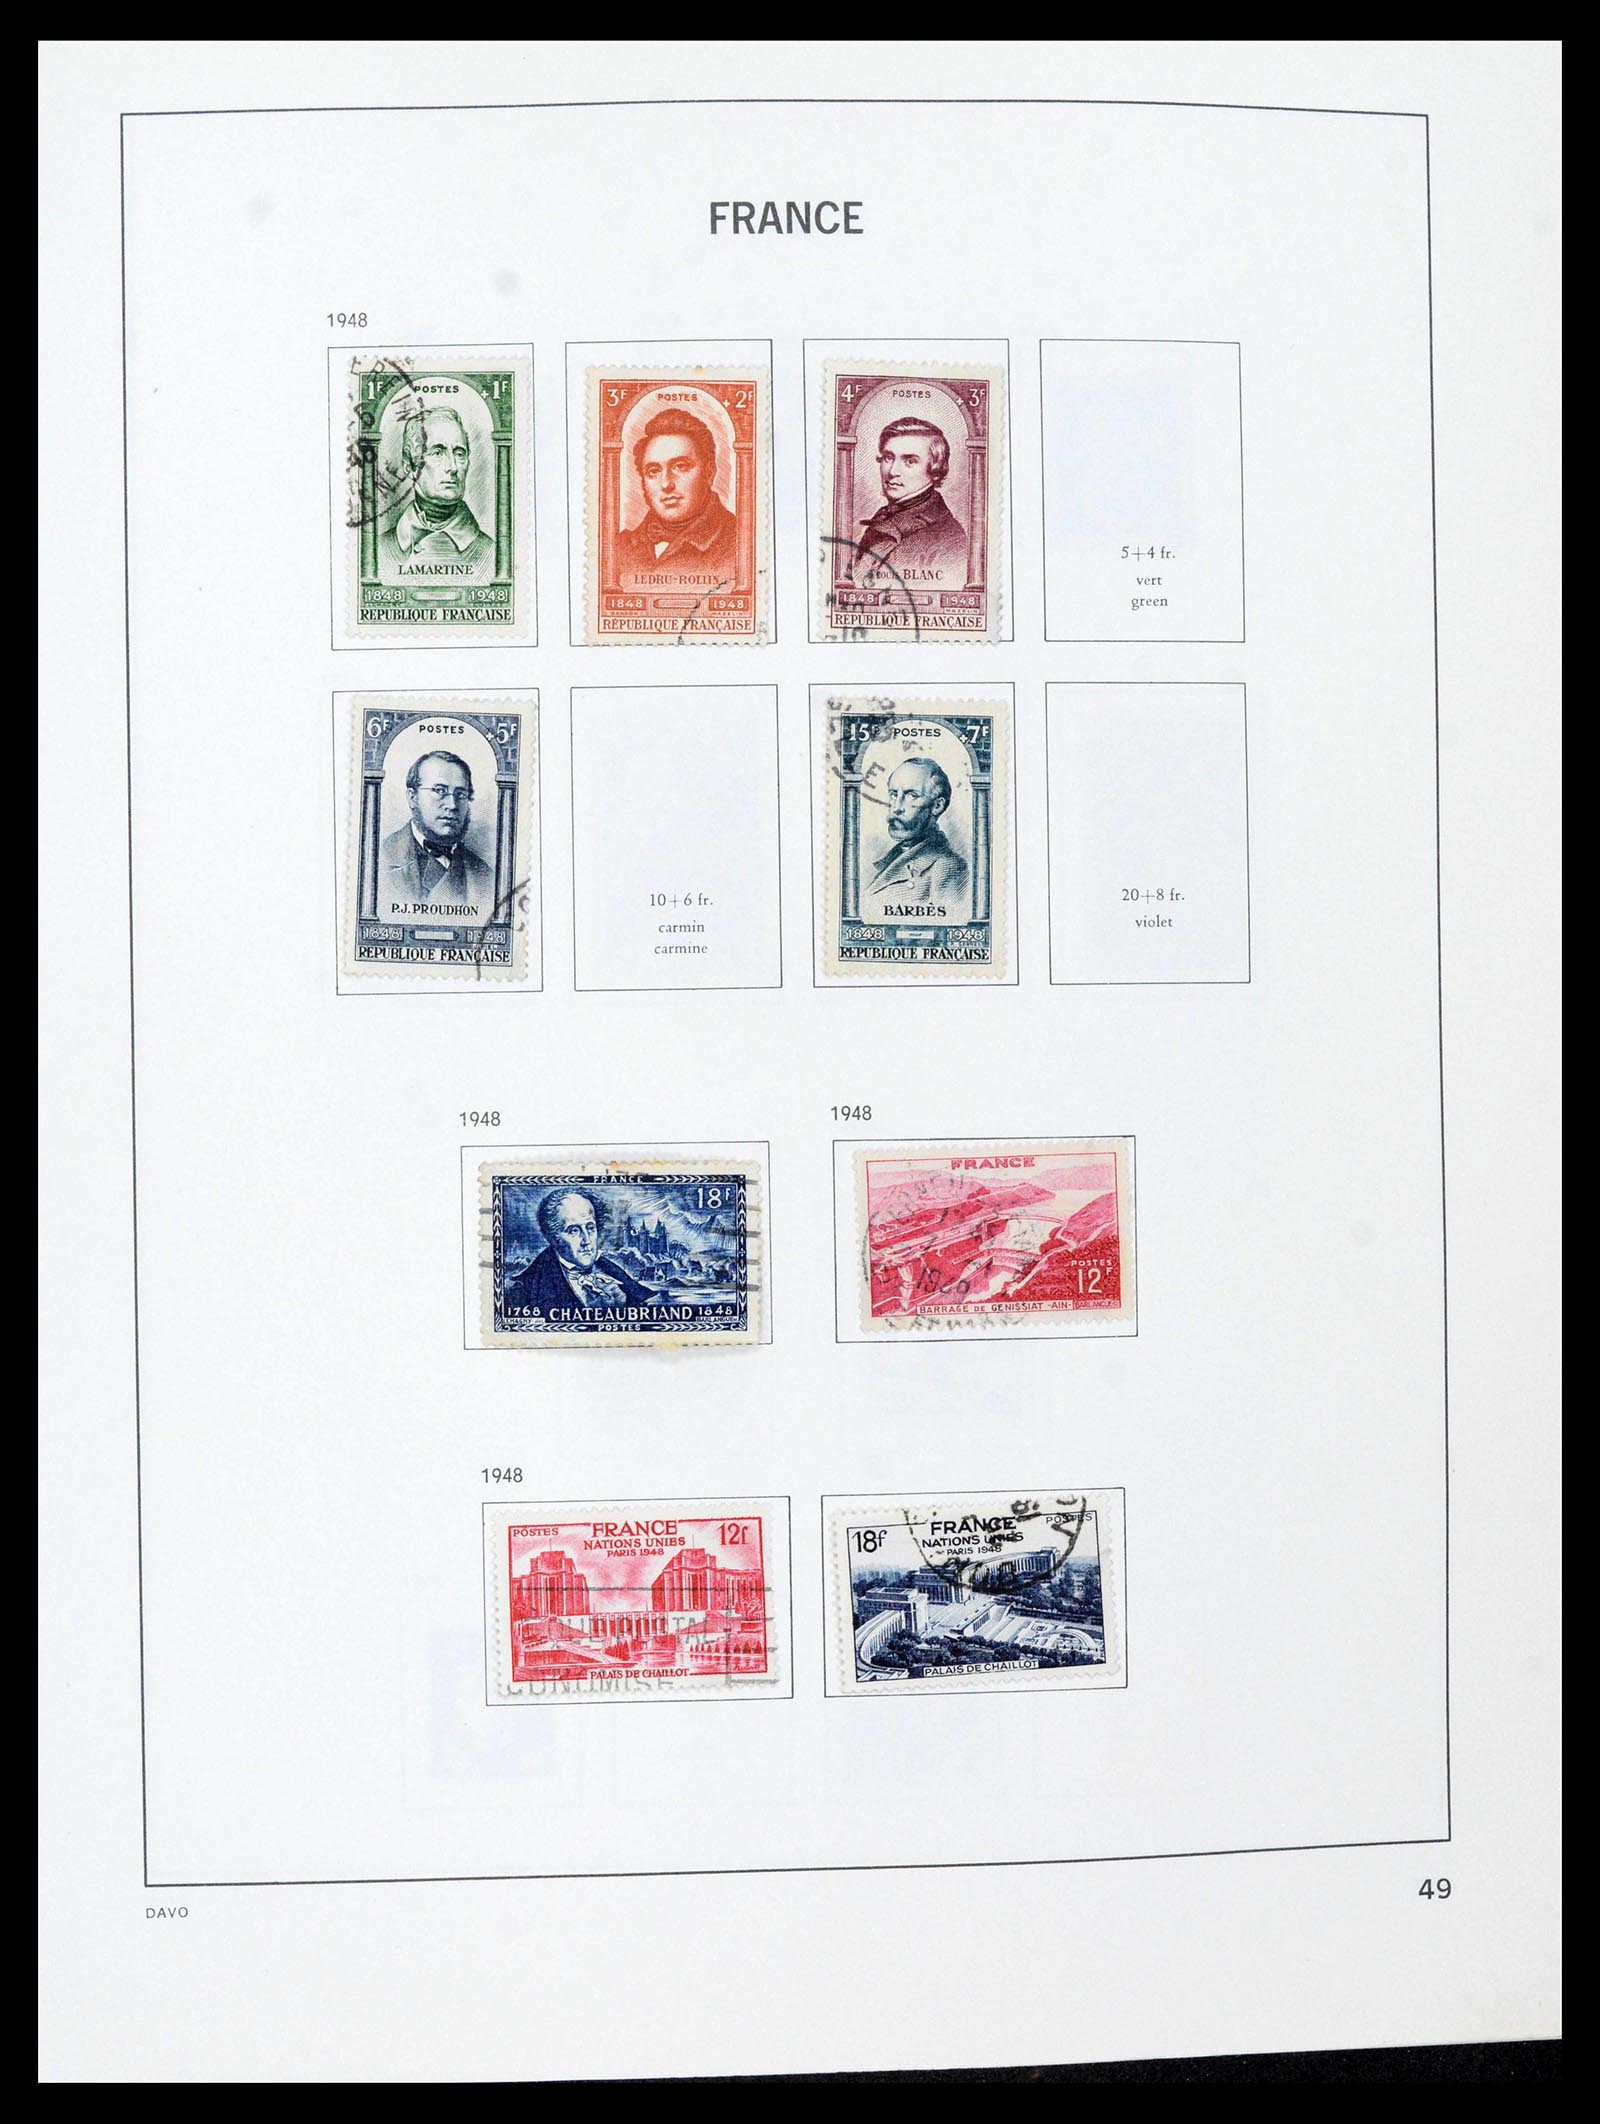 39164 0049 - Stamp collection 39164 France 1849-1981.